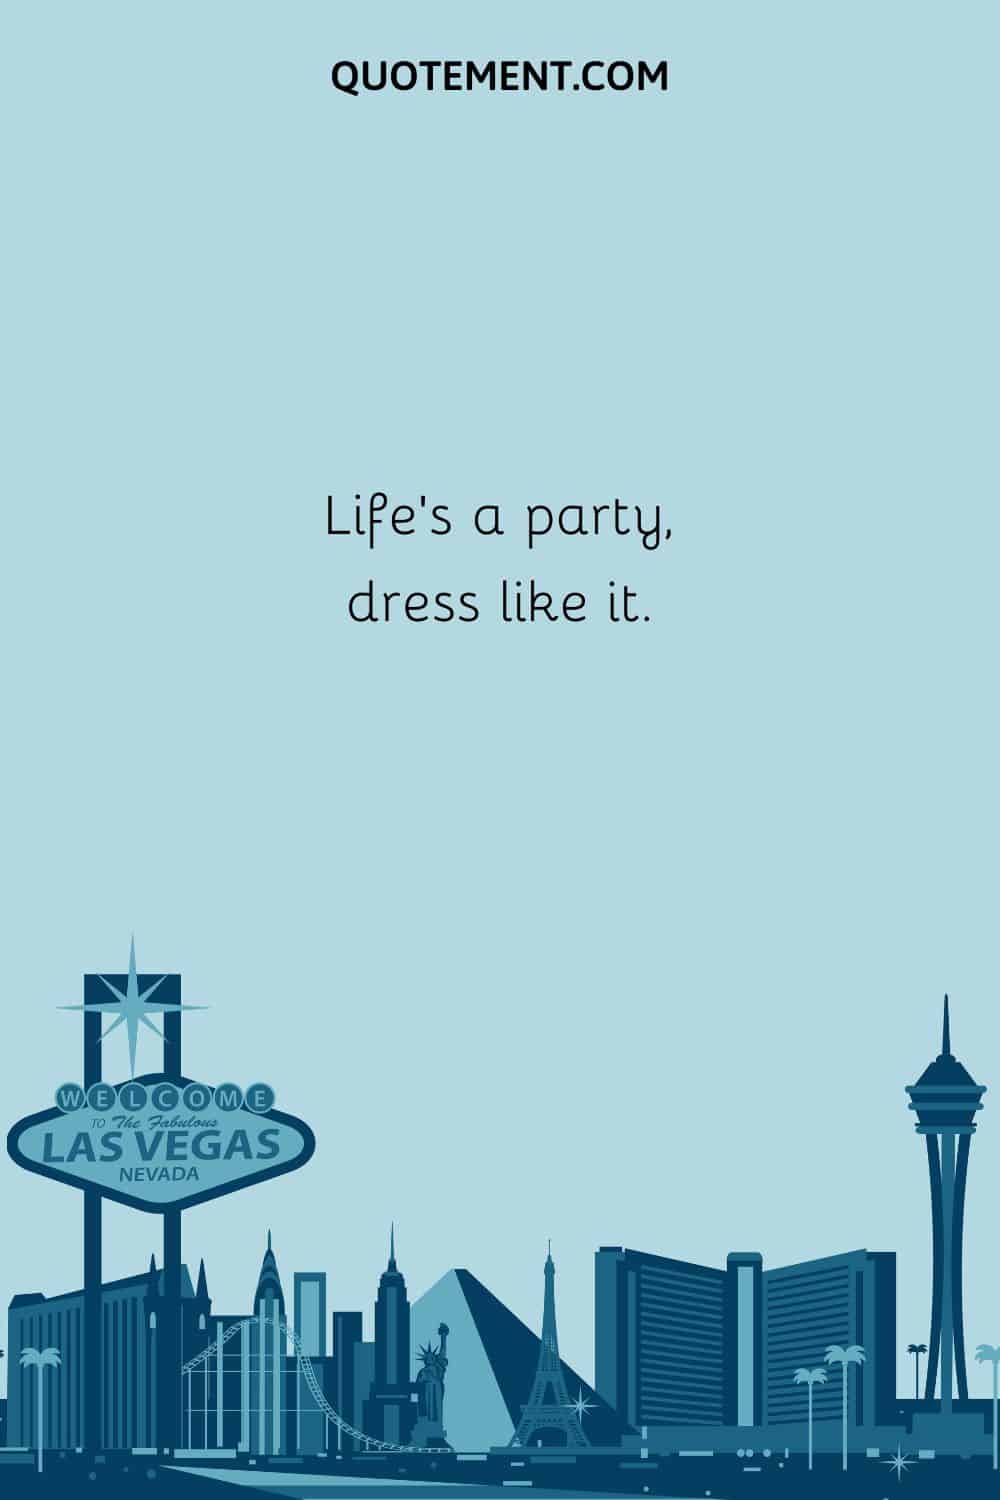 Life’s a party, dress like it.